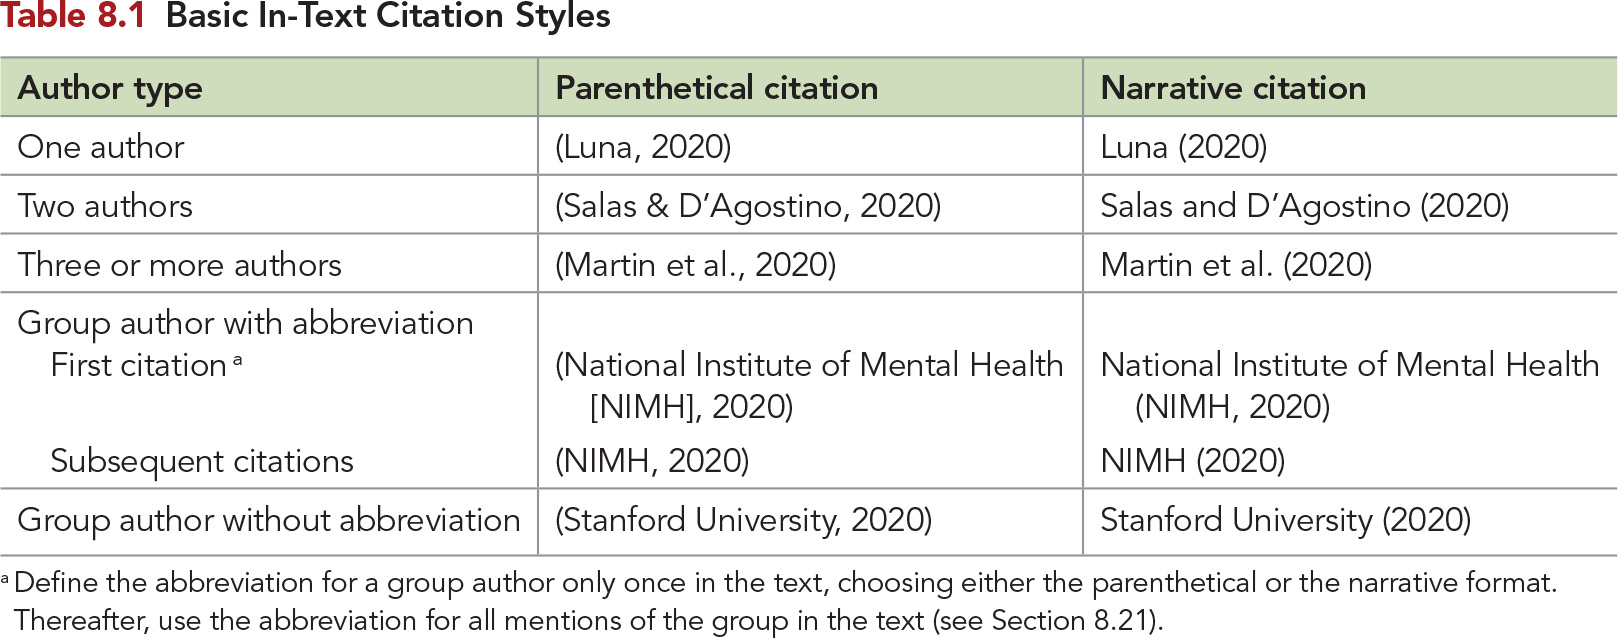 Basic In-text citation styles